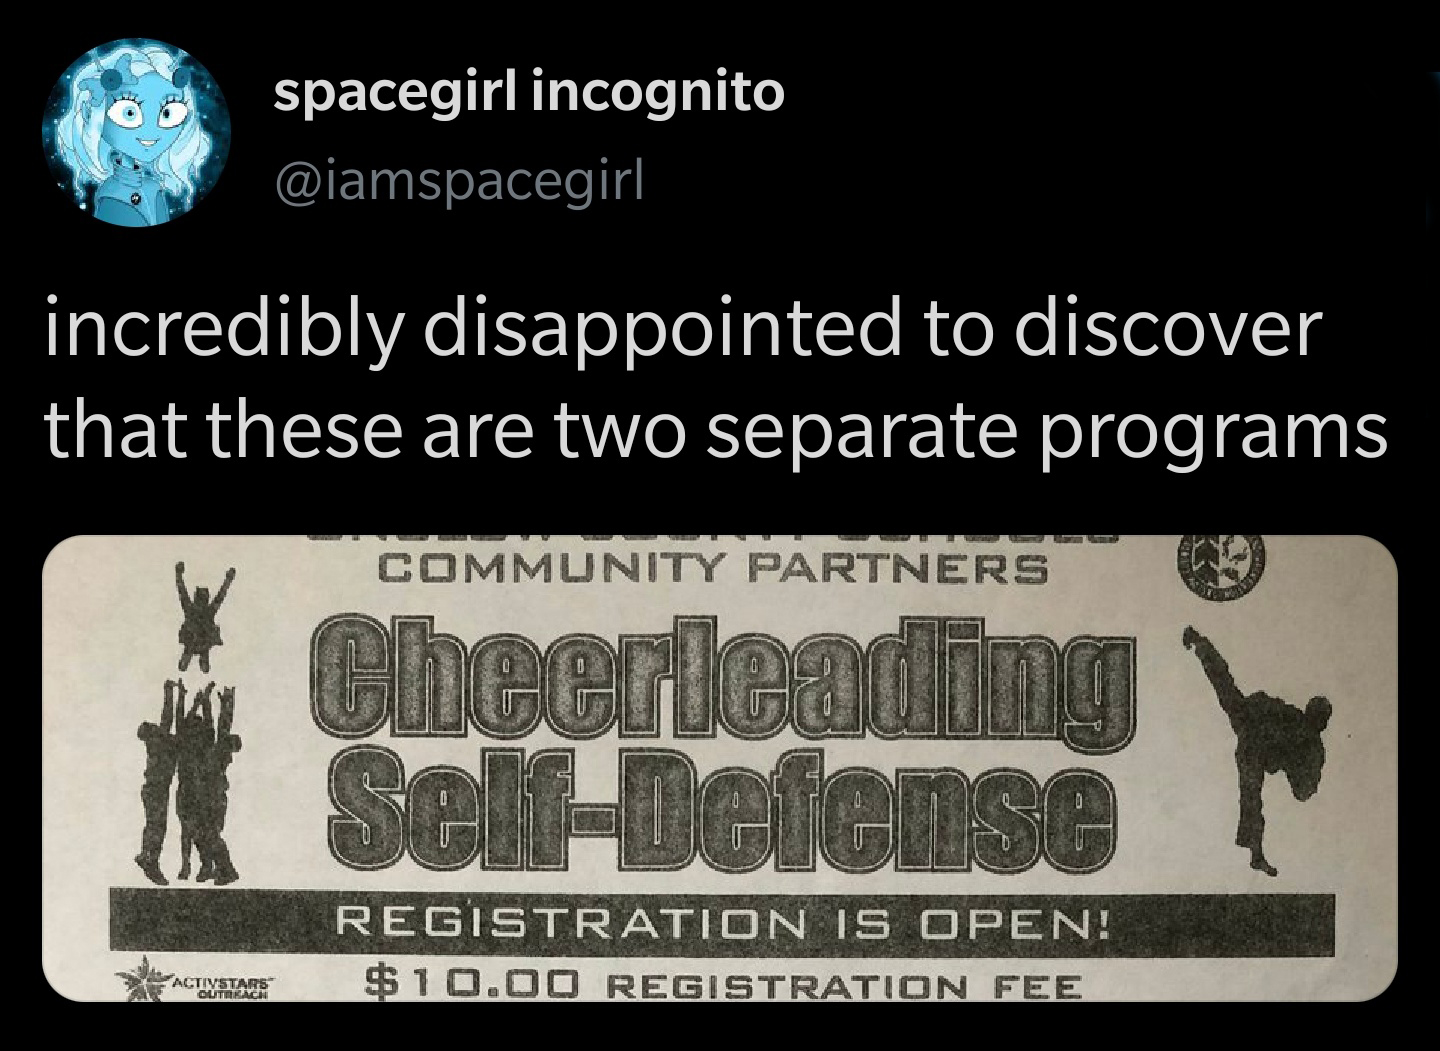 fenerbahçe resimleri - spacegirl incognito incredibly disappointed to discover that these are two separate programs Community Partners Cheerleading Defense Registration Is Open! $10.00 Registration Fee